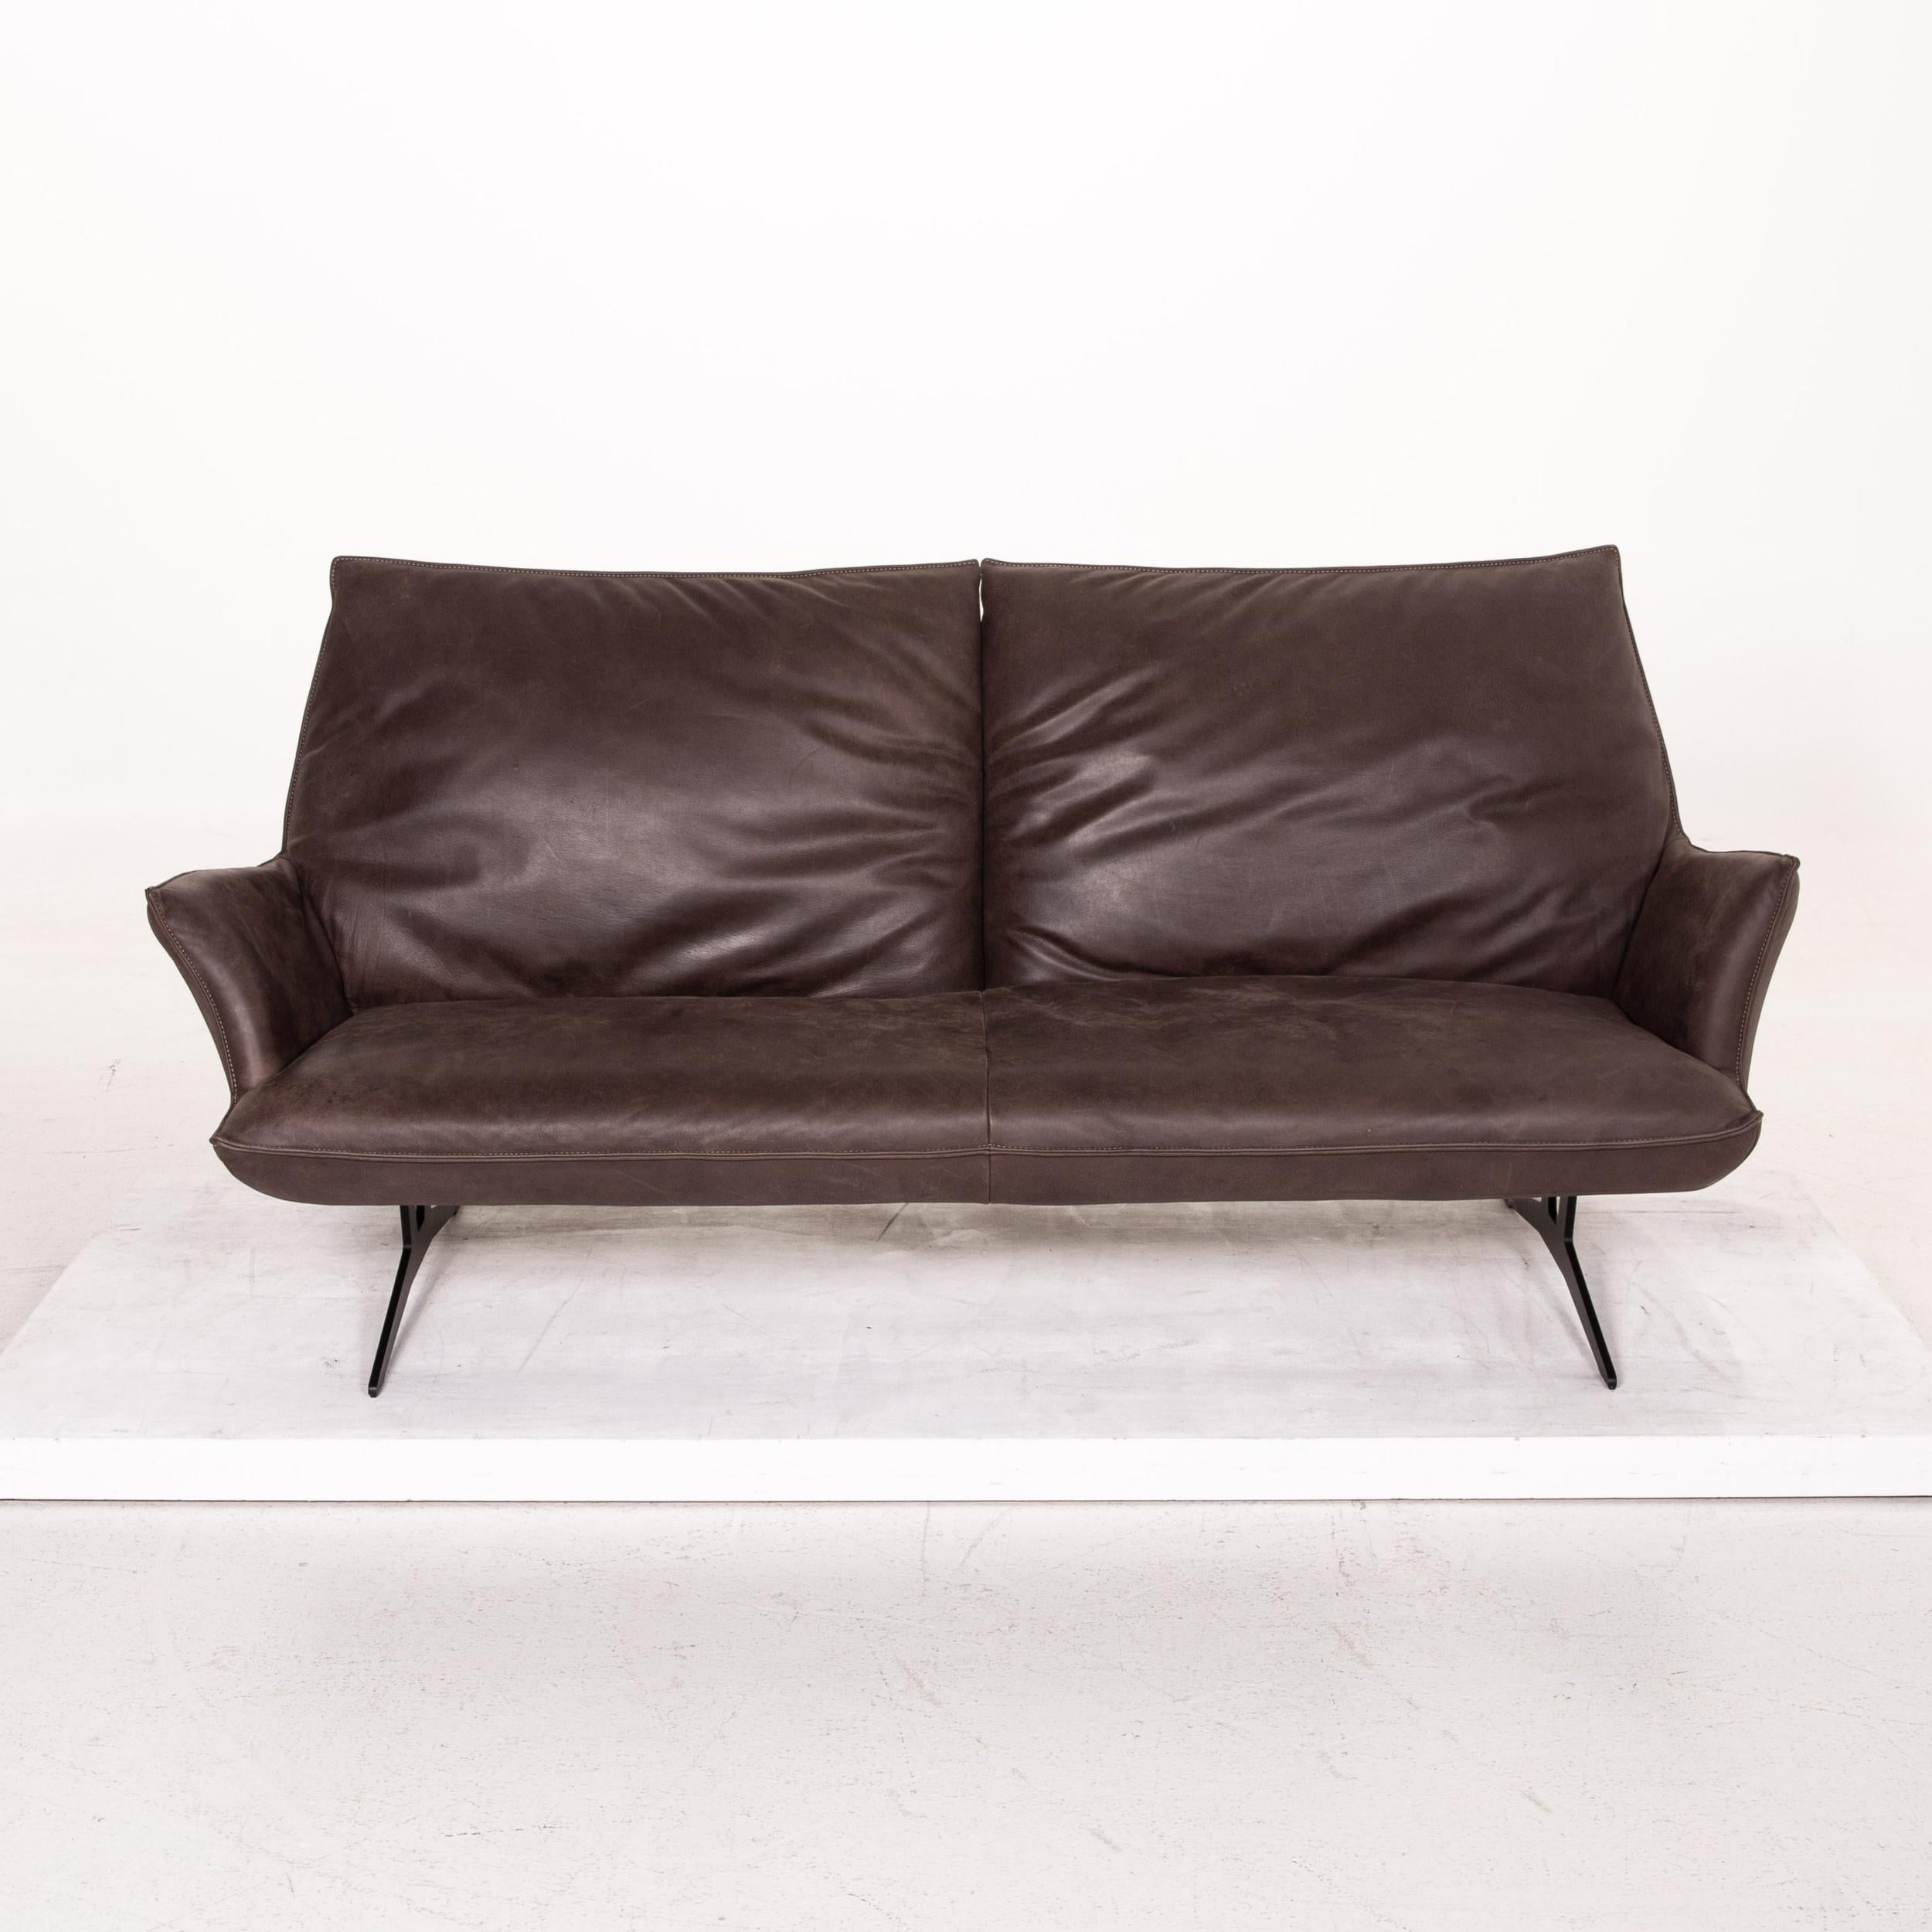 Koinor Leather Sofa Brown Dark Brown Three-Seat Function Couch 5